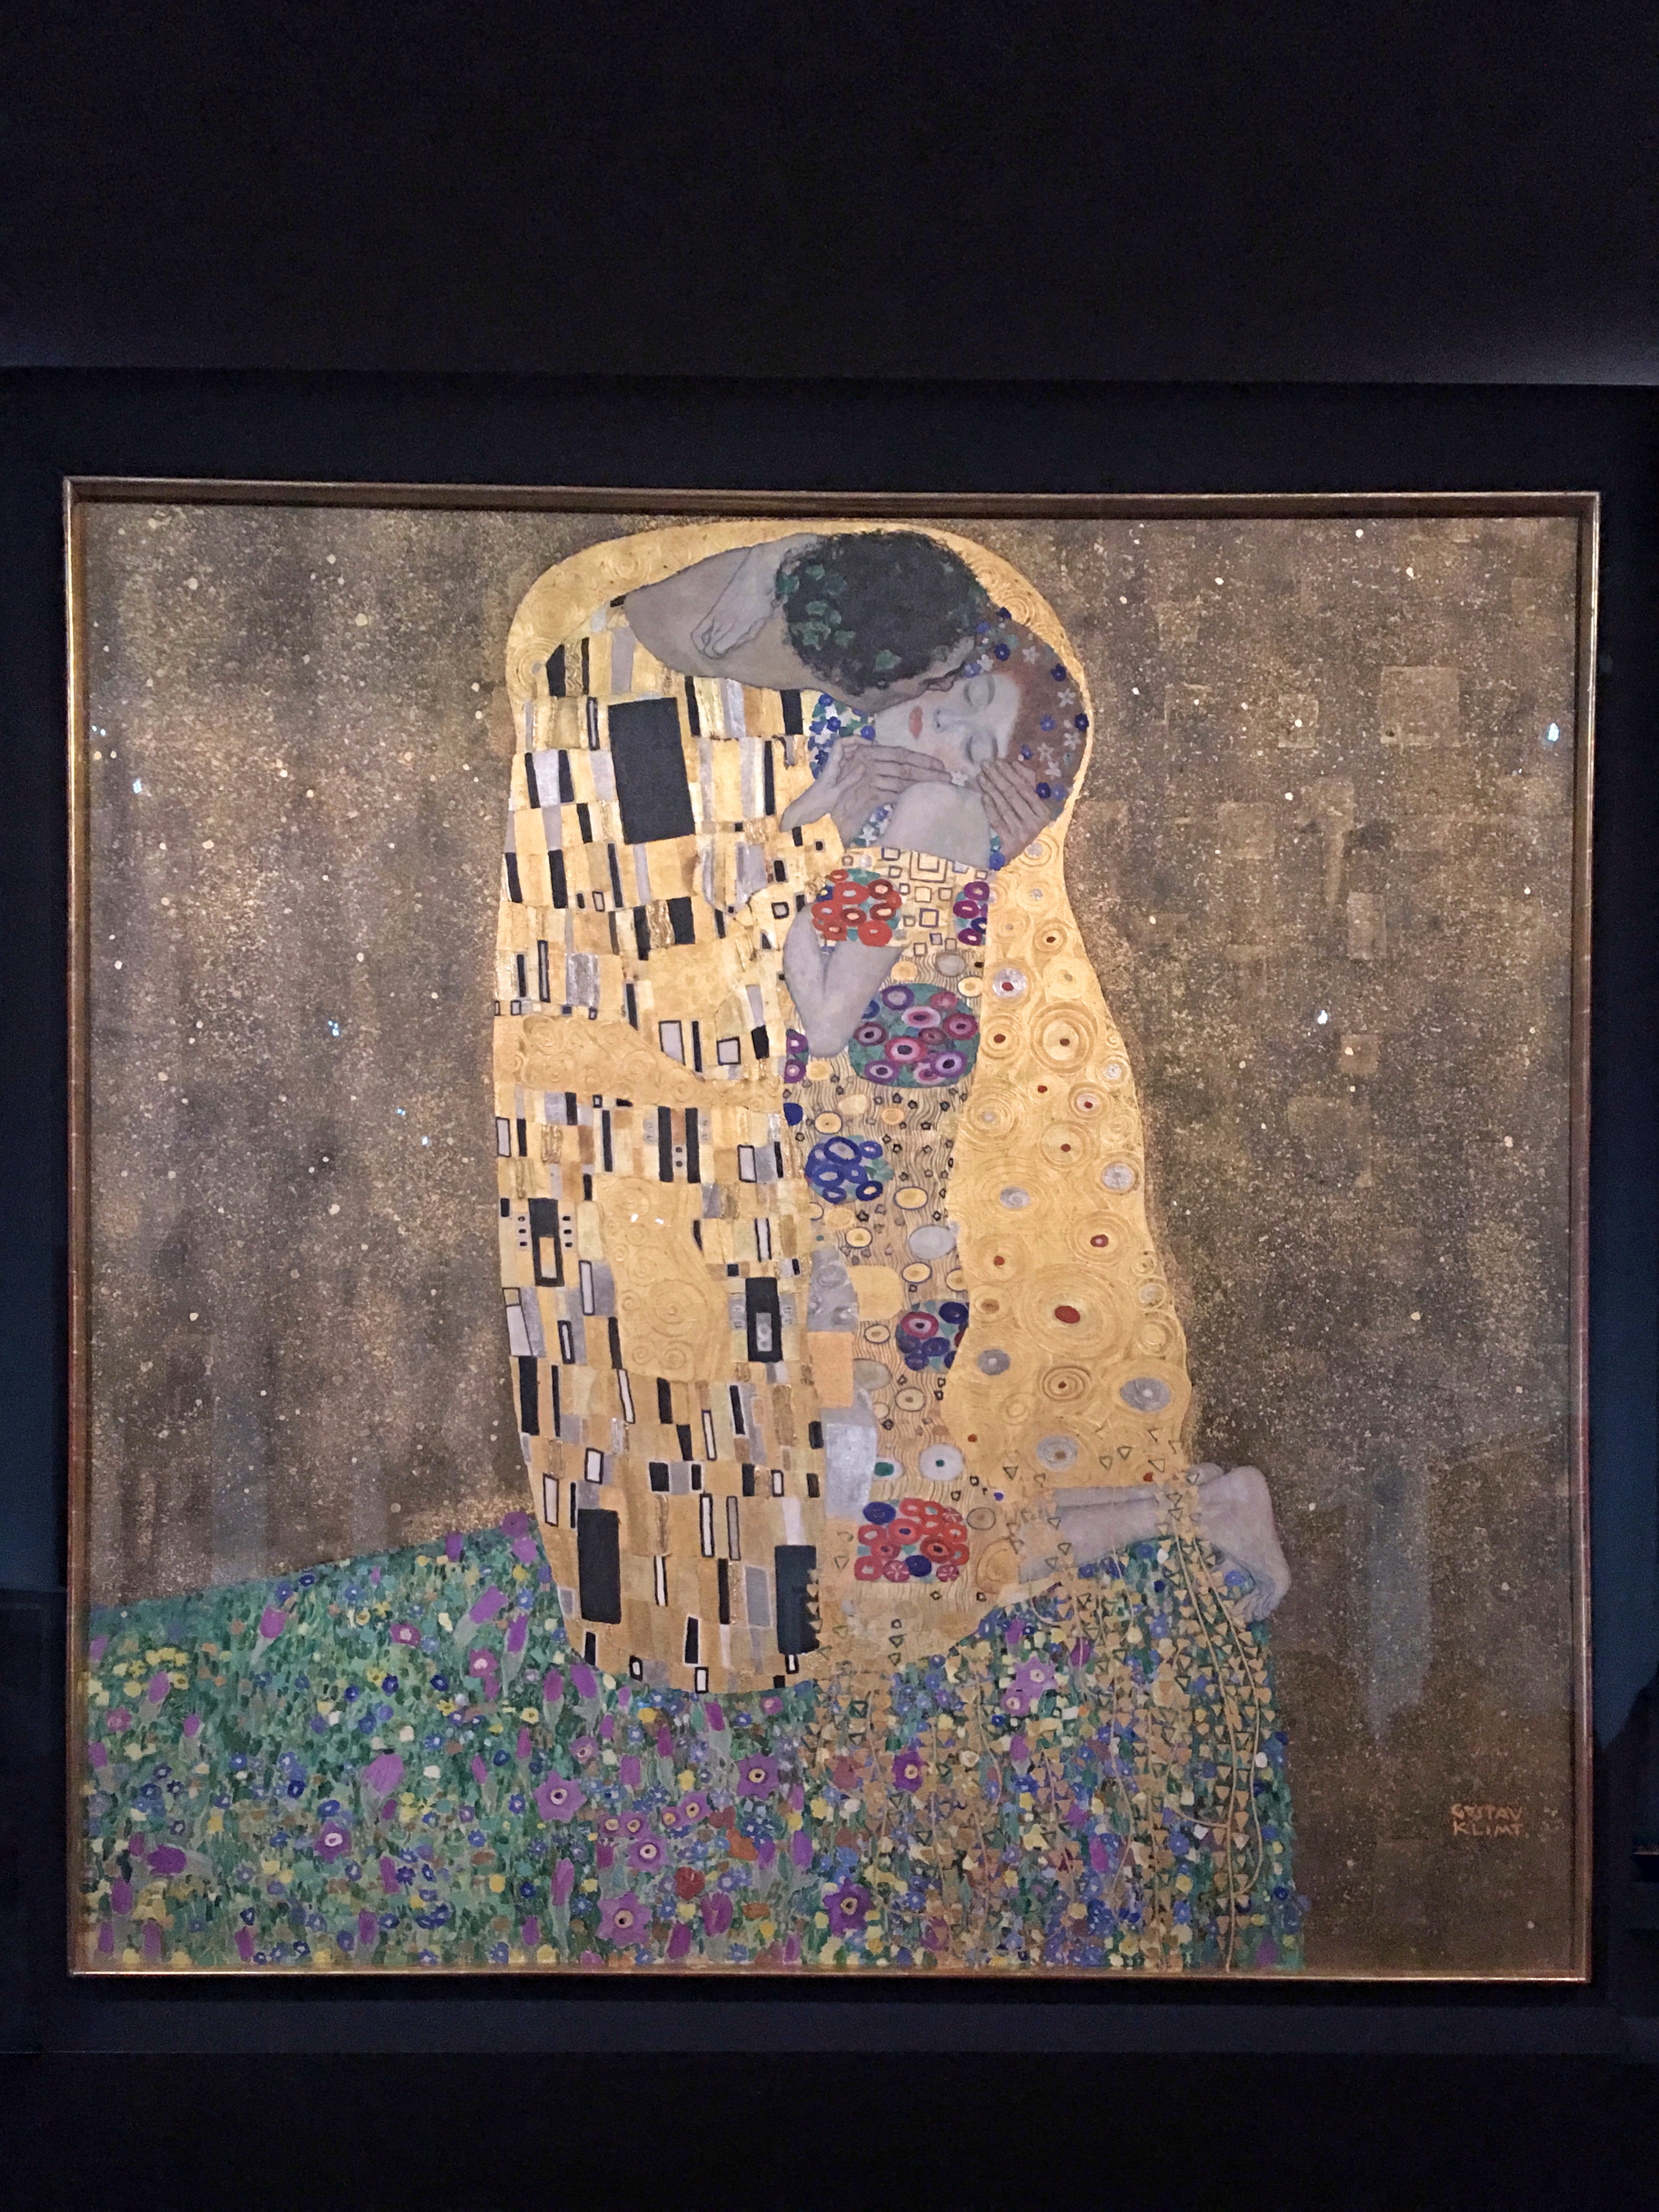 The Kiss by Klimt in Belvedere Palace